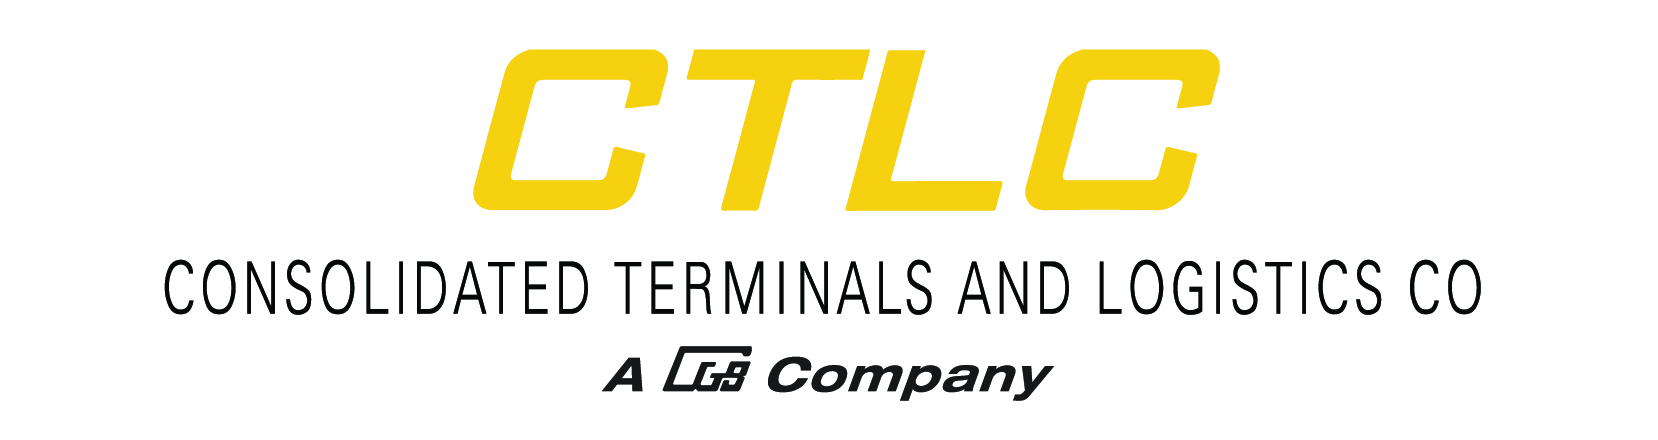 Consolidated Terminals and Logistics Co